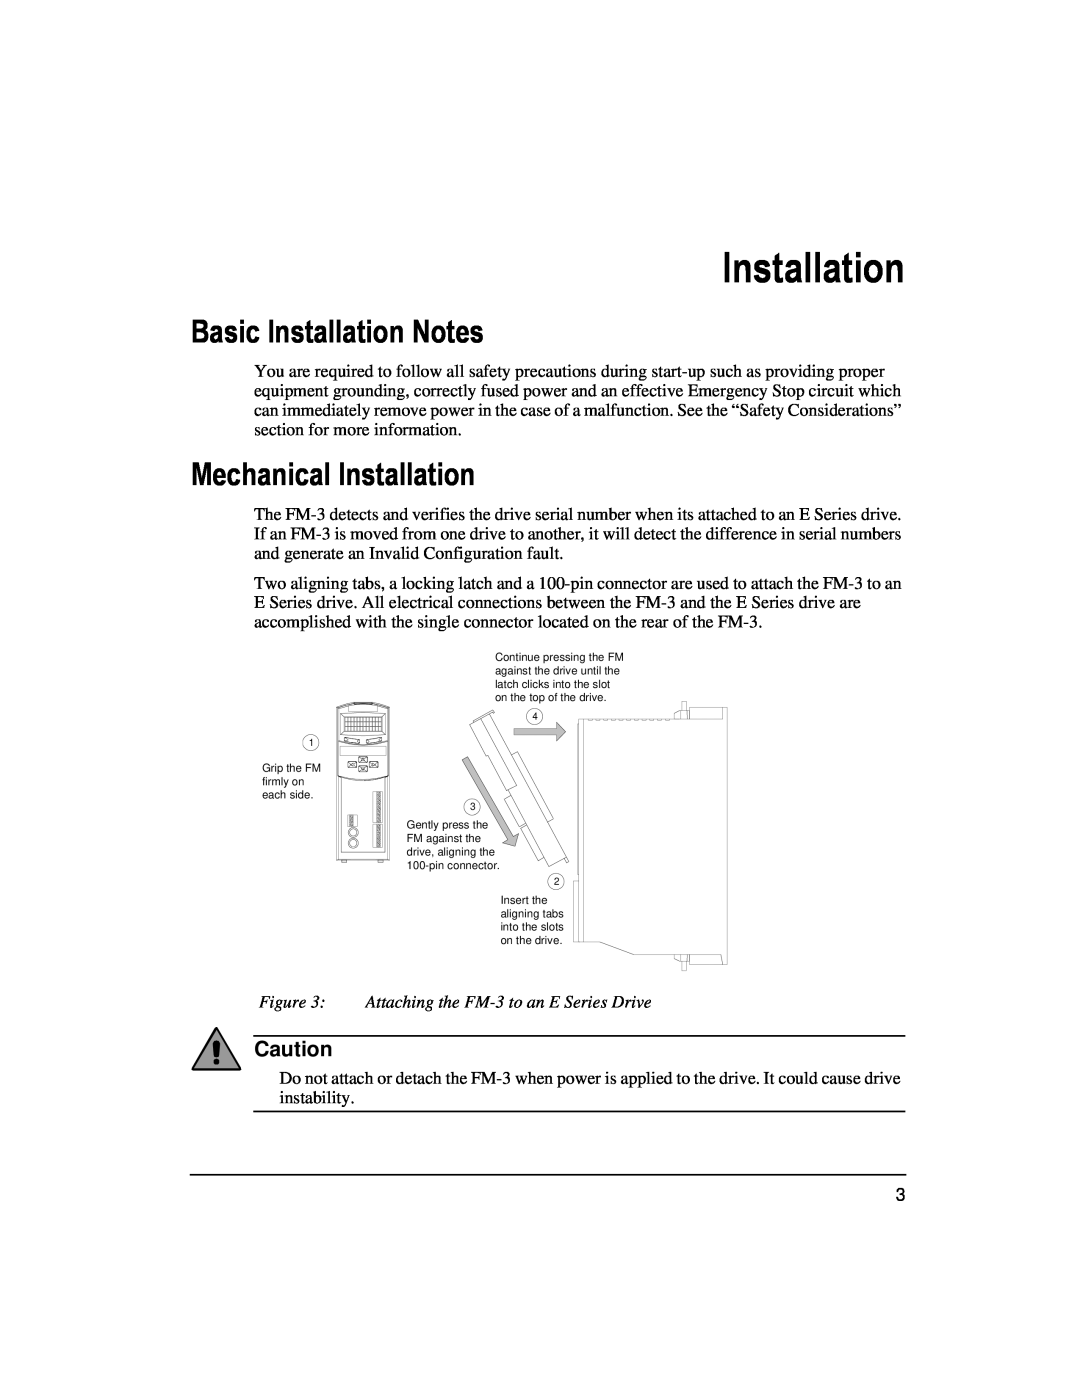 Emerson 400508-02 Basic Installation Notes, Mechanical Installation, Attaching the FM-3 to an E Series Drive 